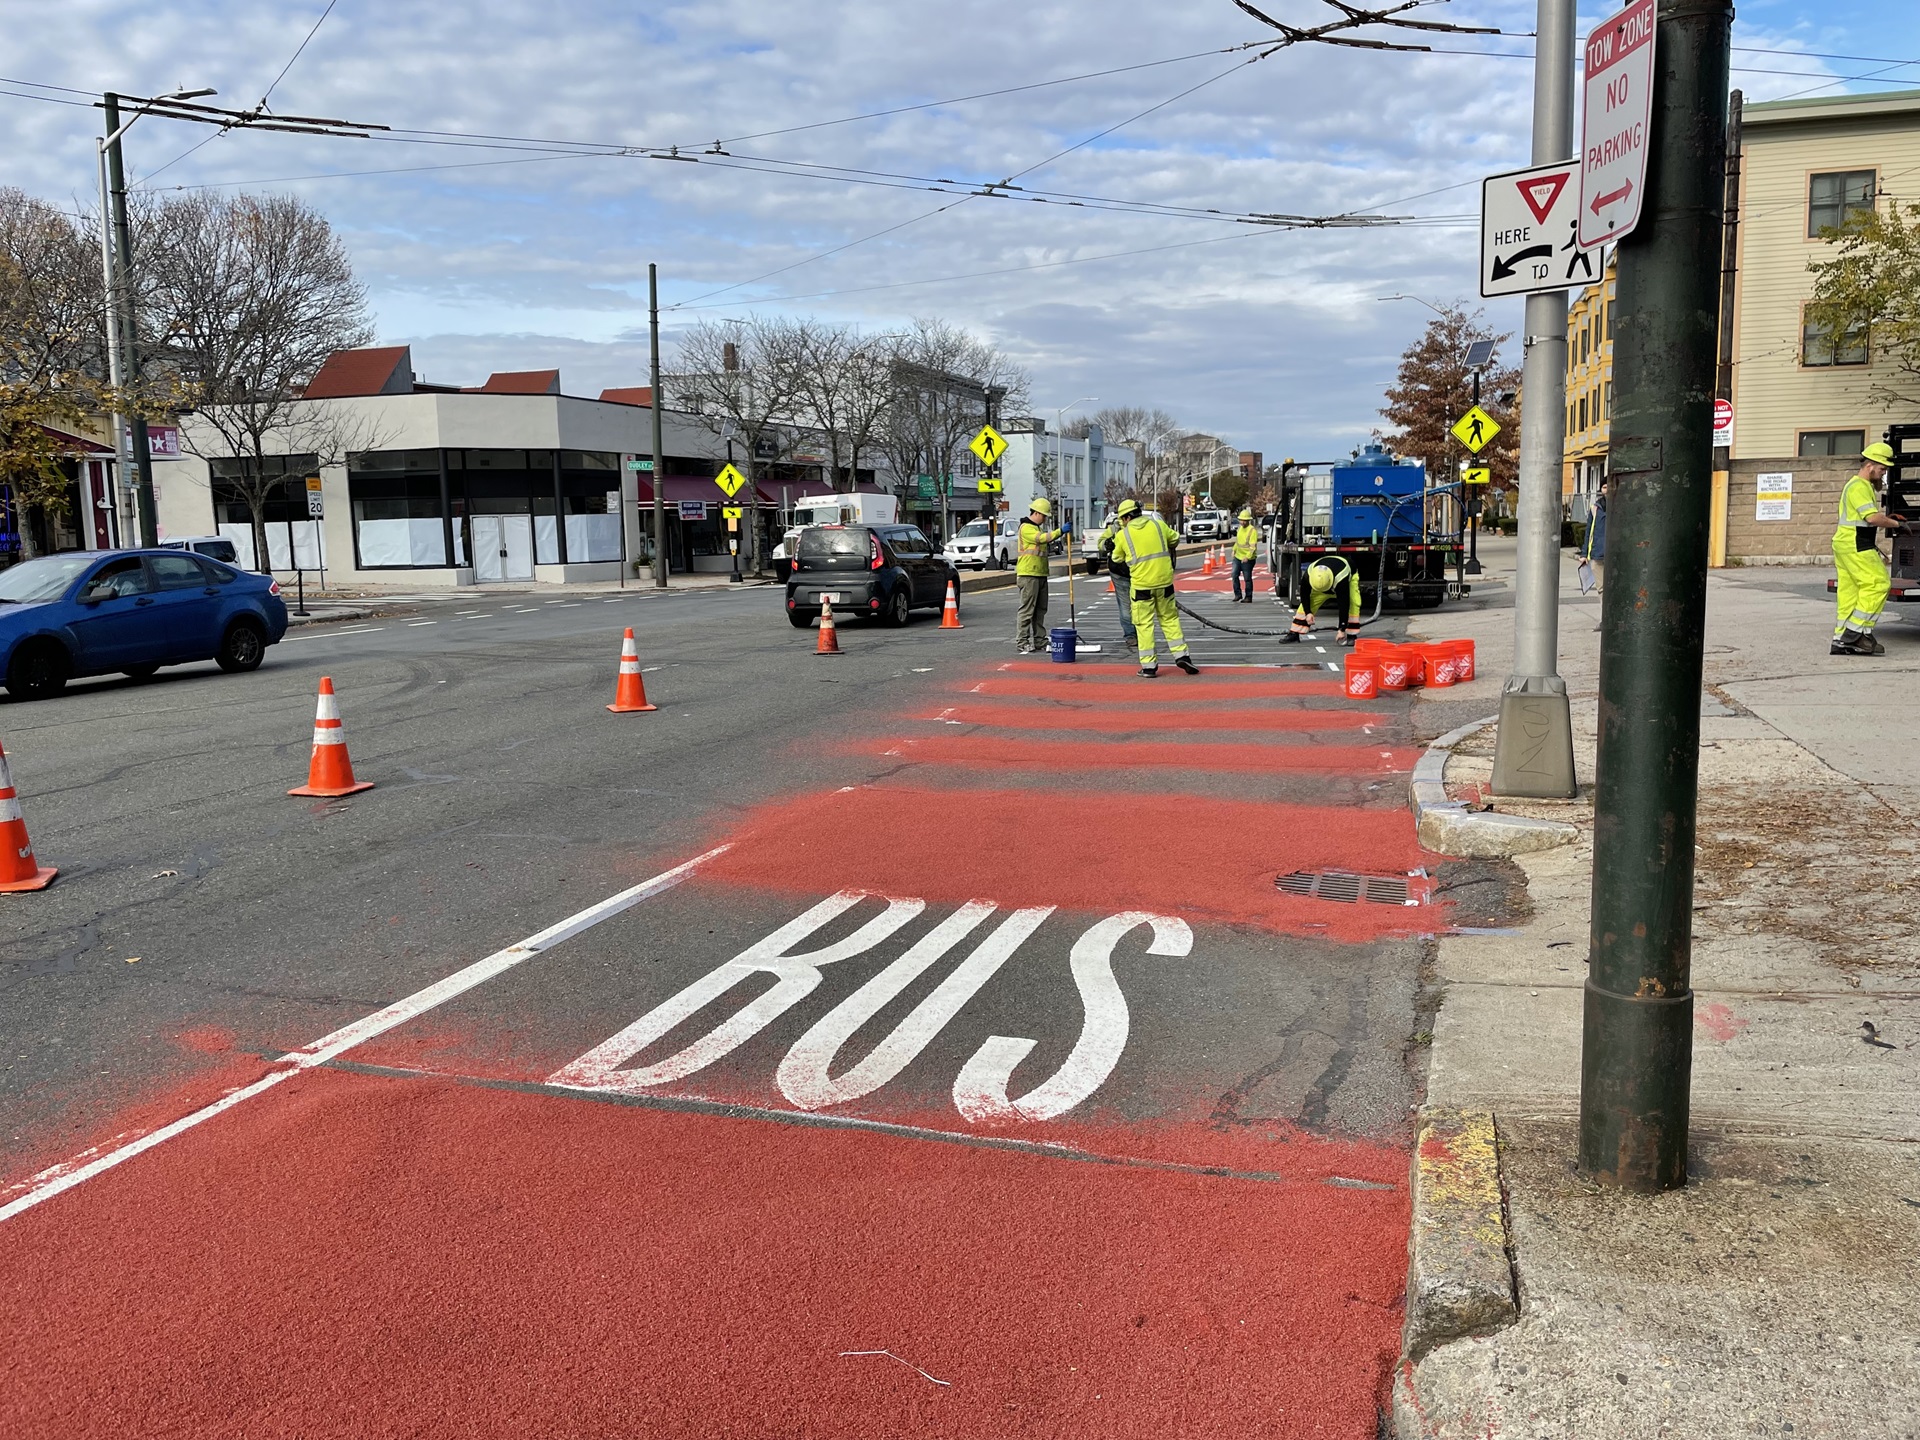 A crew of five people in neon yellow installs a bus lane by painting the lane red. To the left, cones temporarily separated the crew and lane from the rest of the street.